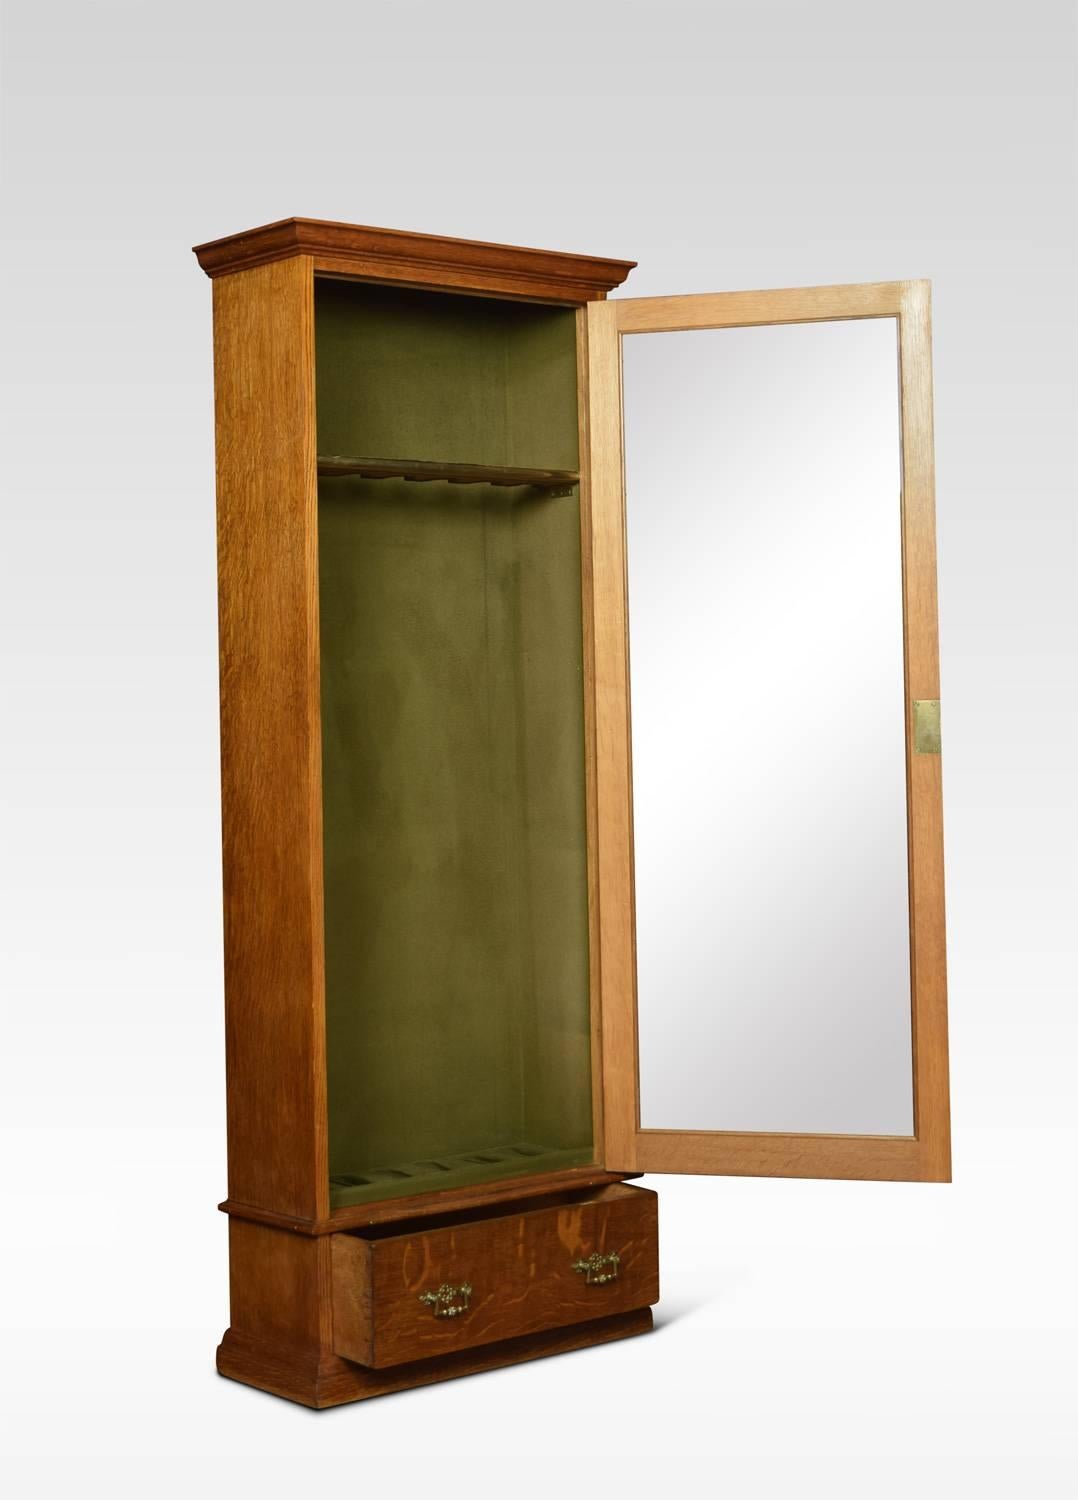 Late Victorian oak floor standing gun display cabinet, the large single glazed door opening to reveal gun rests, over a short drawer to the base. Fitted with brass handles and opening to reveal an ivorine label for Army and Navy